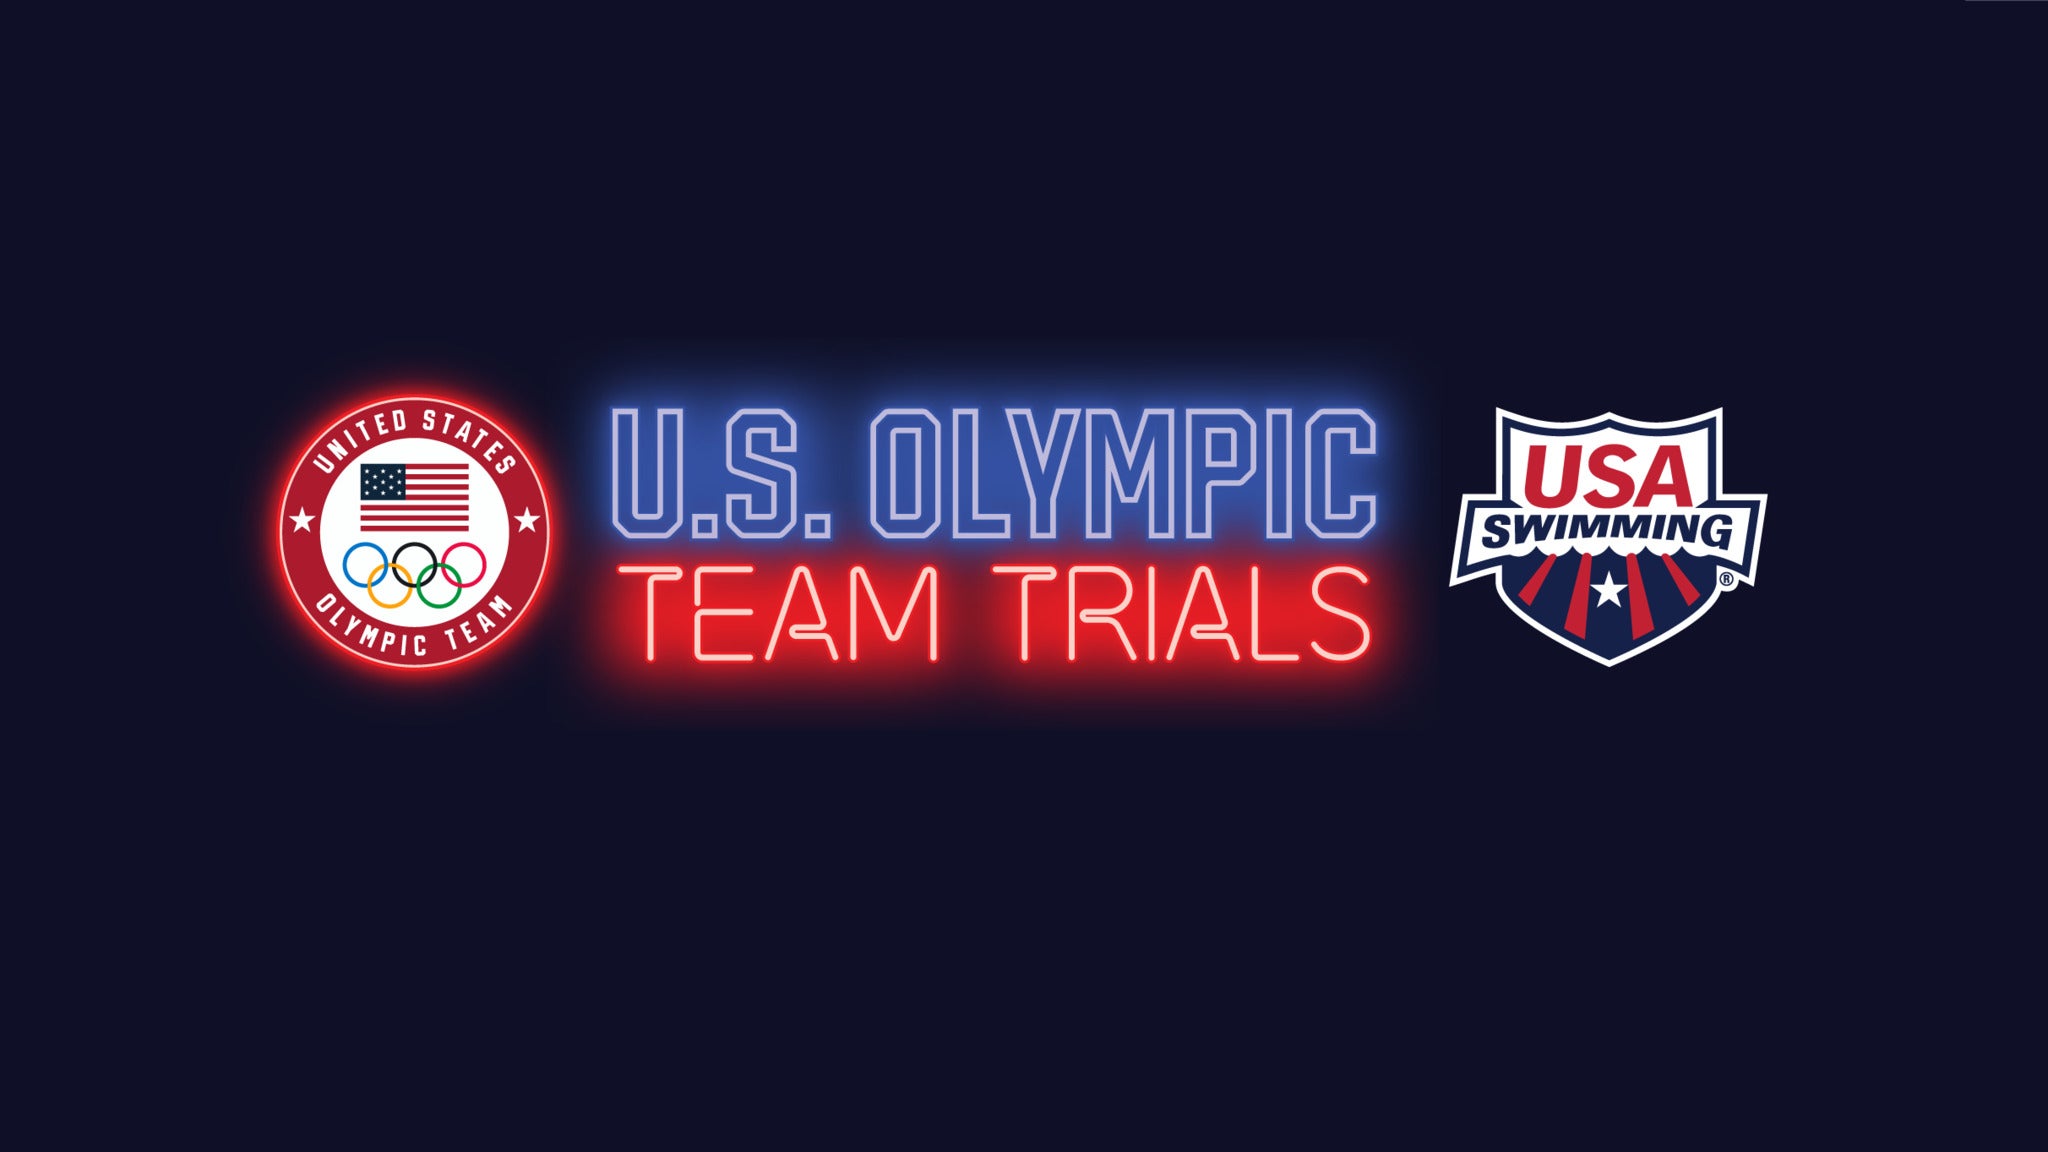 Day 4 Package: U.S. Olympic Team Trials - Swimming in Omaha promo photo for Past Purchase presale offer code